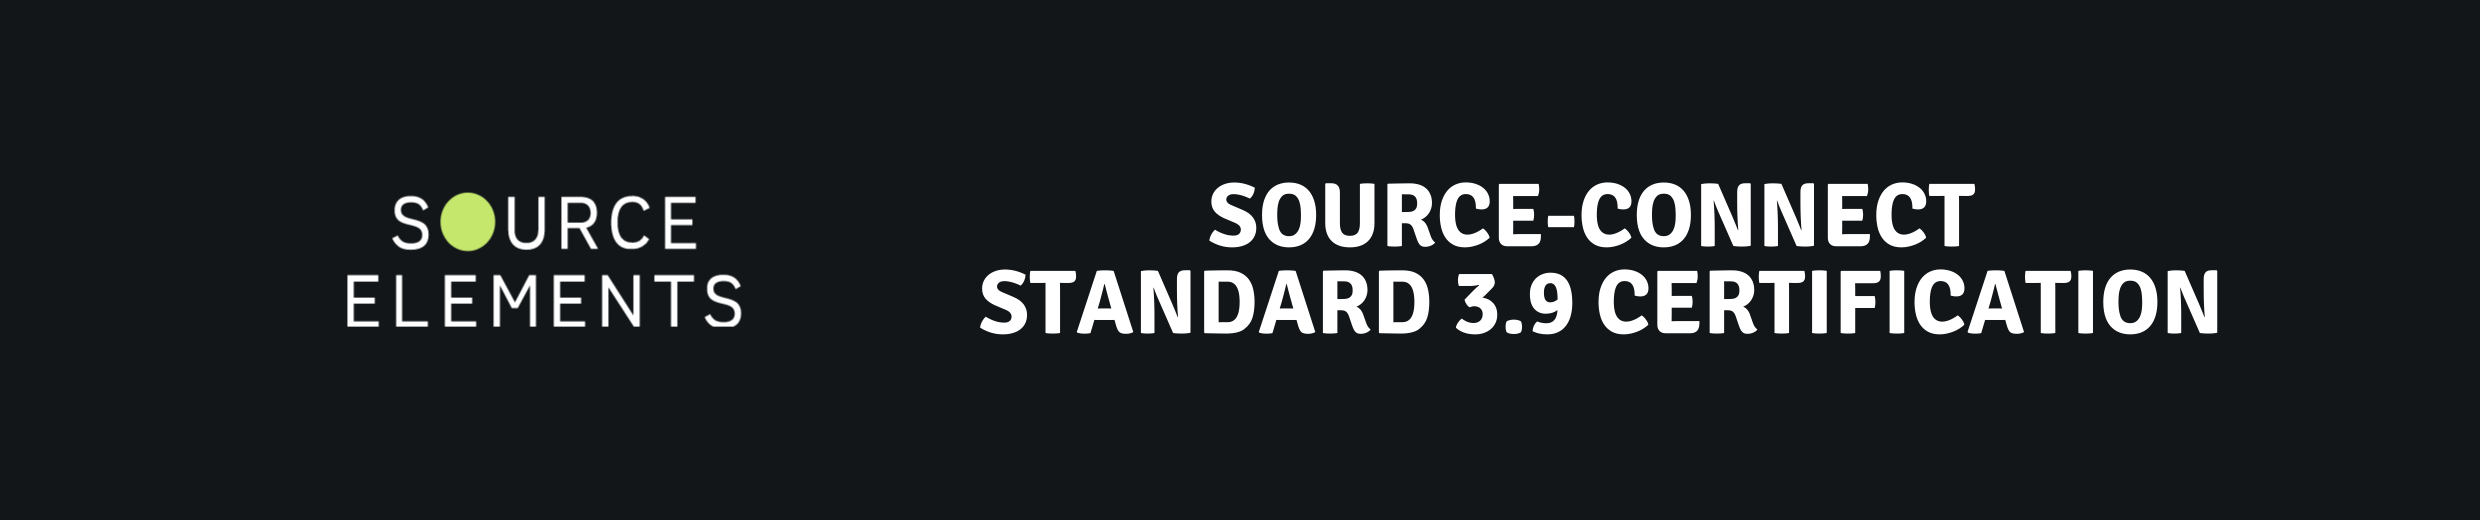 Course and Certification for Source-Connect Standard 3.9